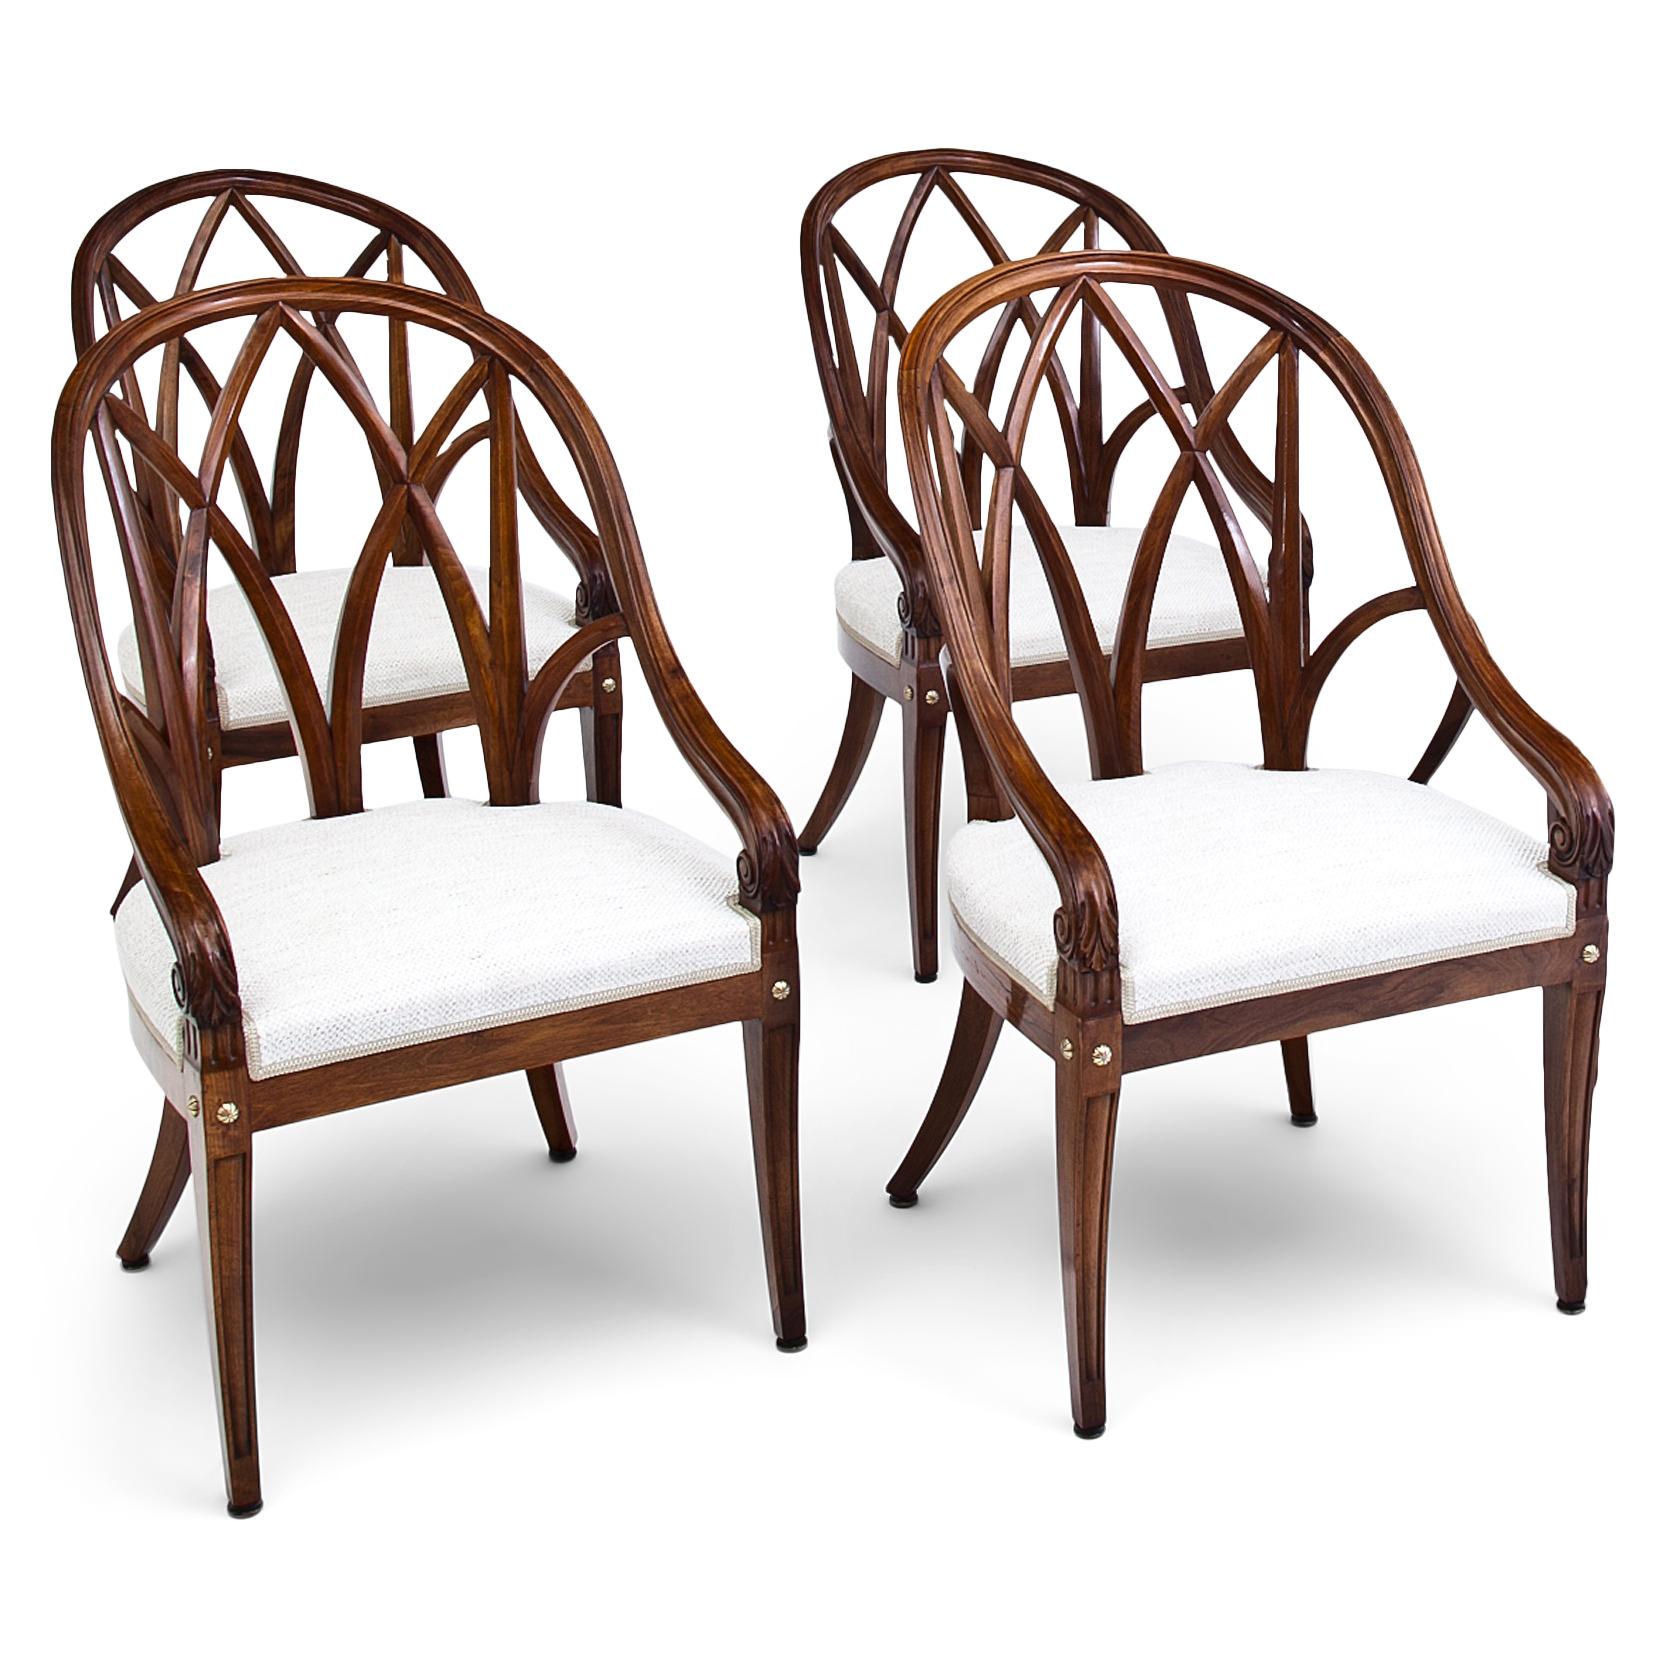 Set of 12 elegant French armchairs with exquiste, curved backrests out of solid walnut. The armrests end in volutes and rest upon the tapered front legs. These are decorated with round brass rivets and are fluted. The backsides show each a small